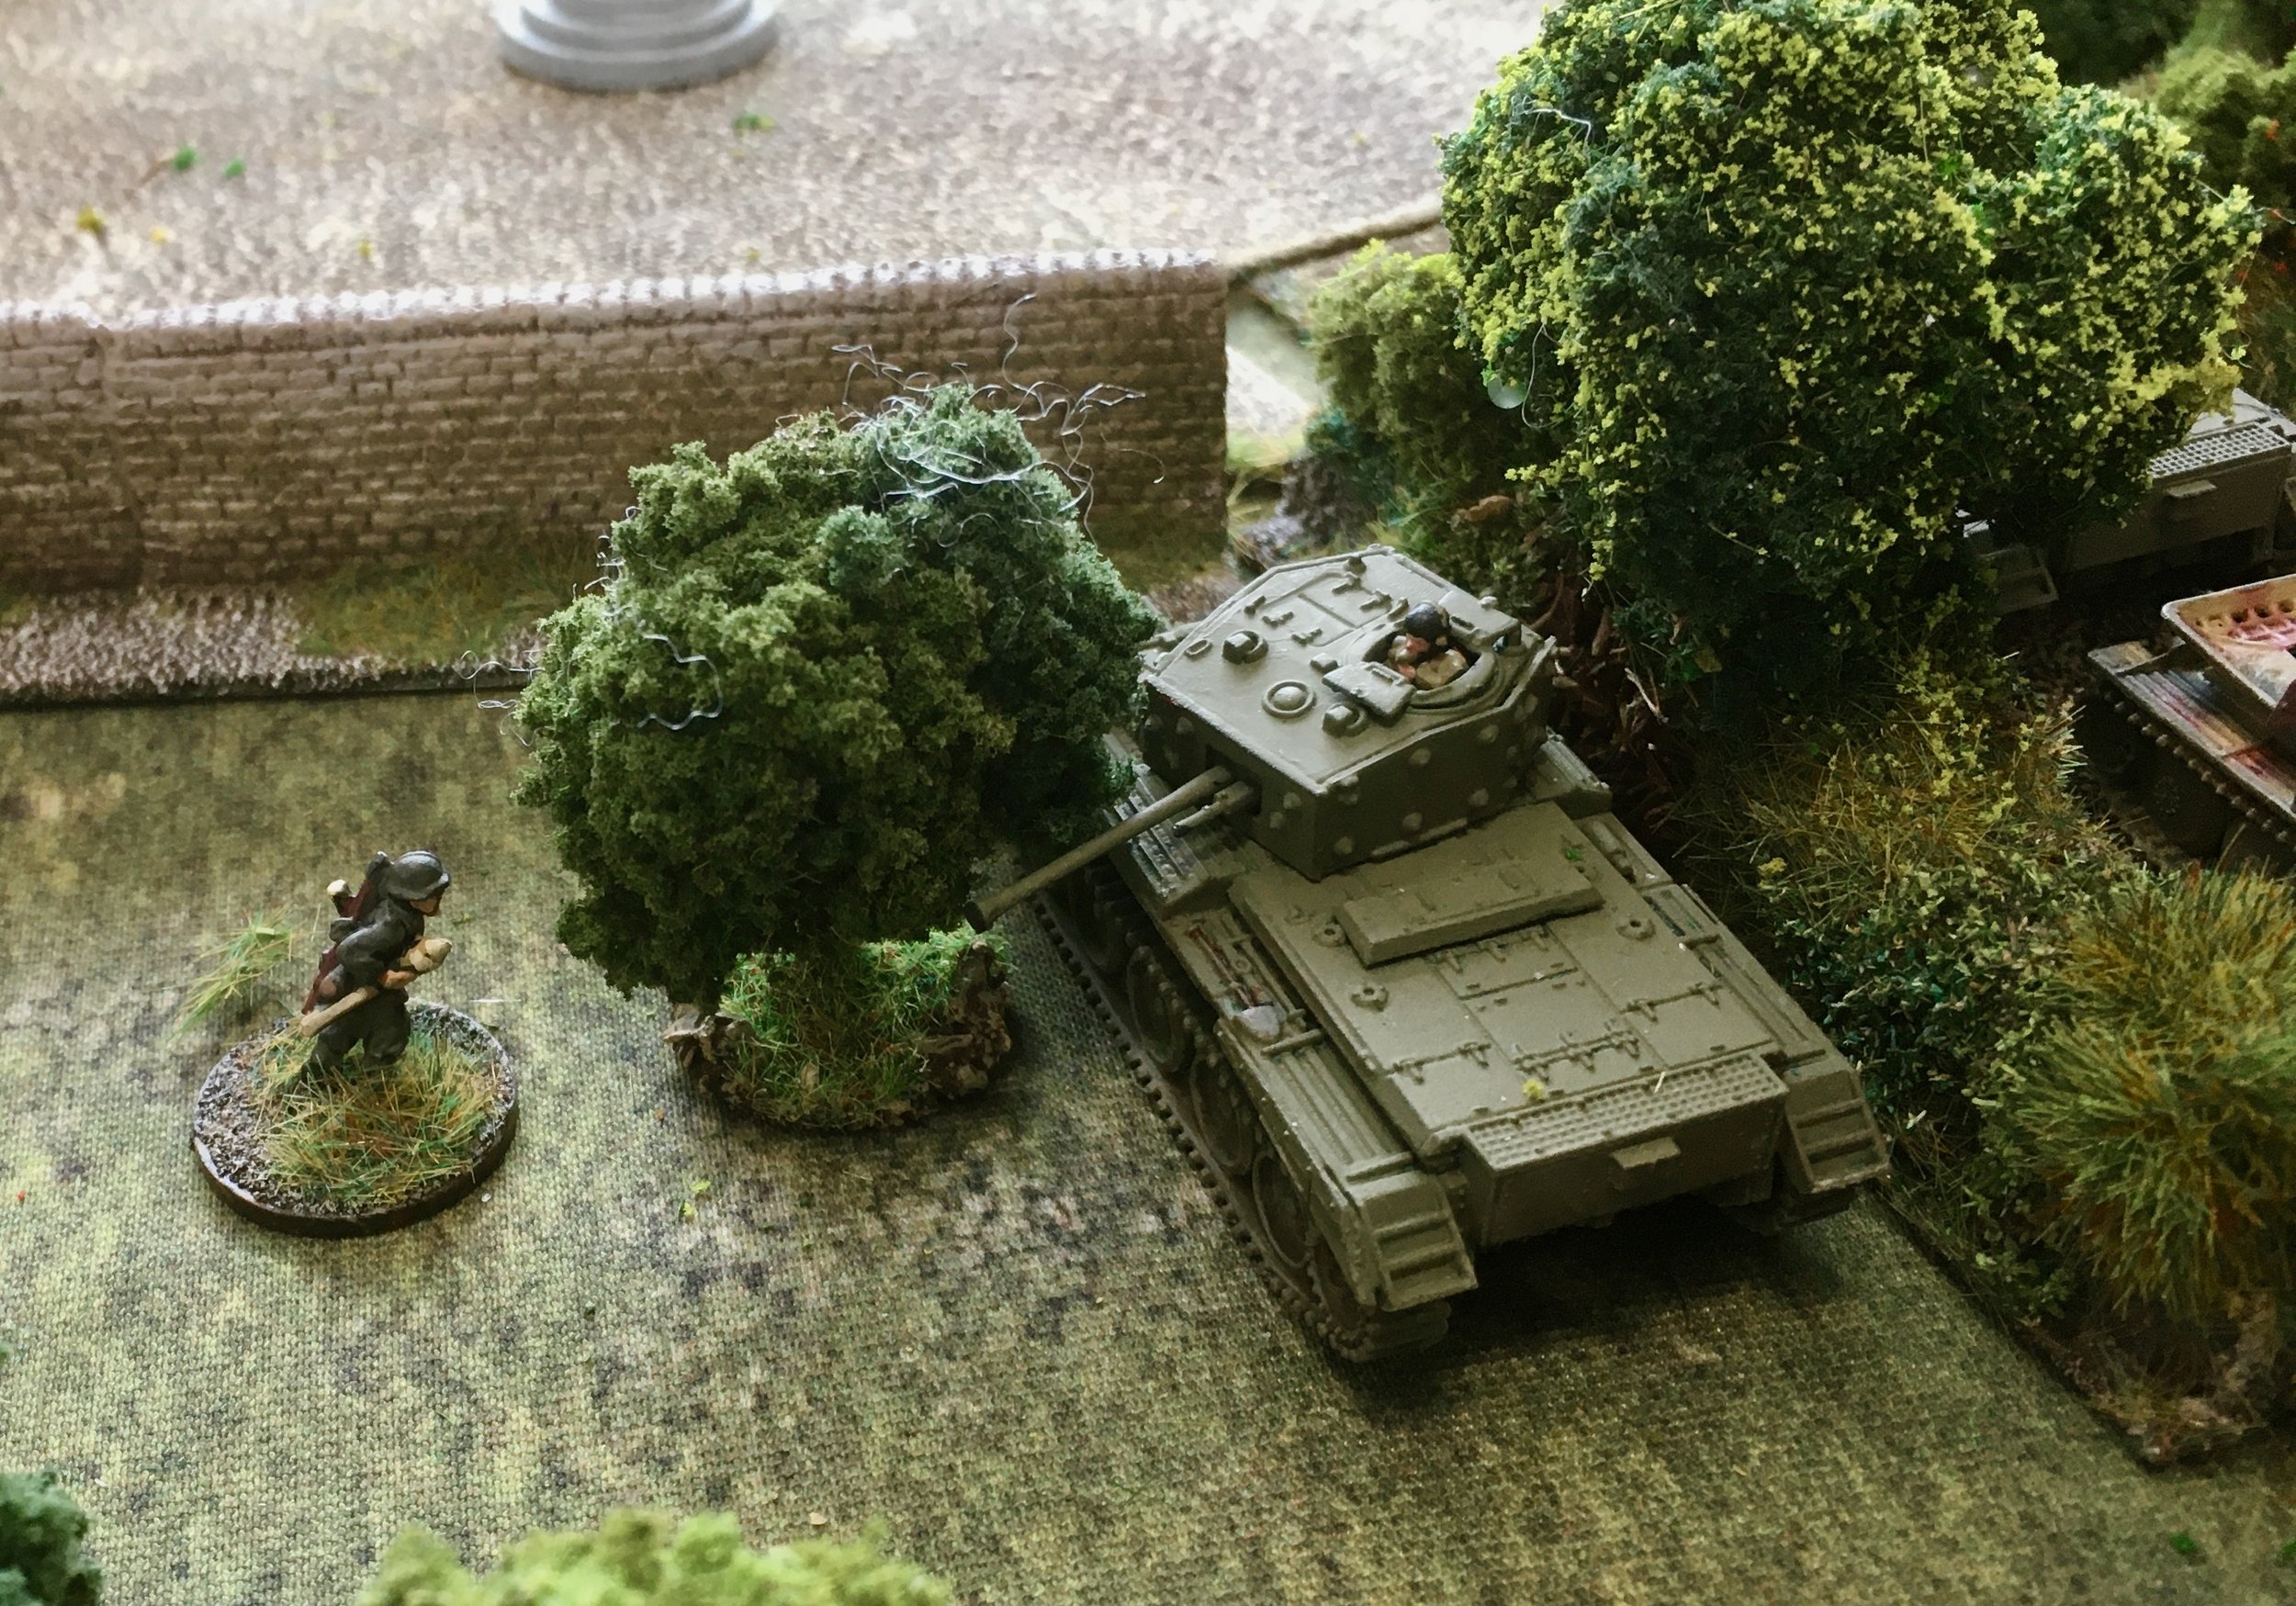 And deployed one of its panzerfausts!